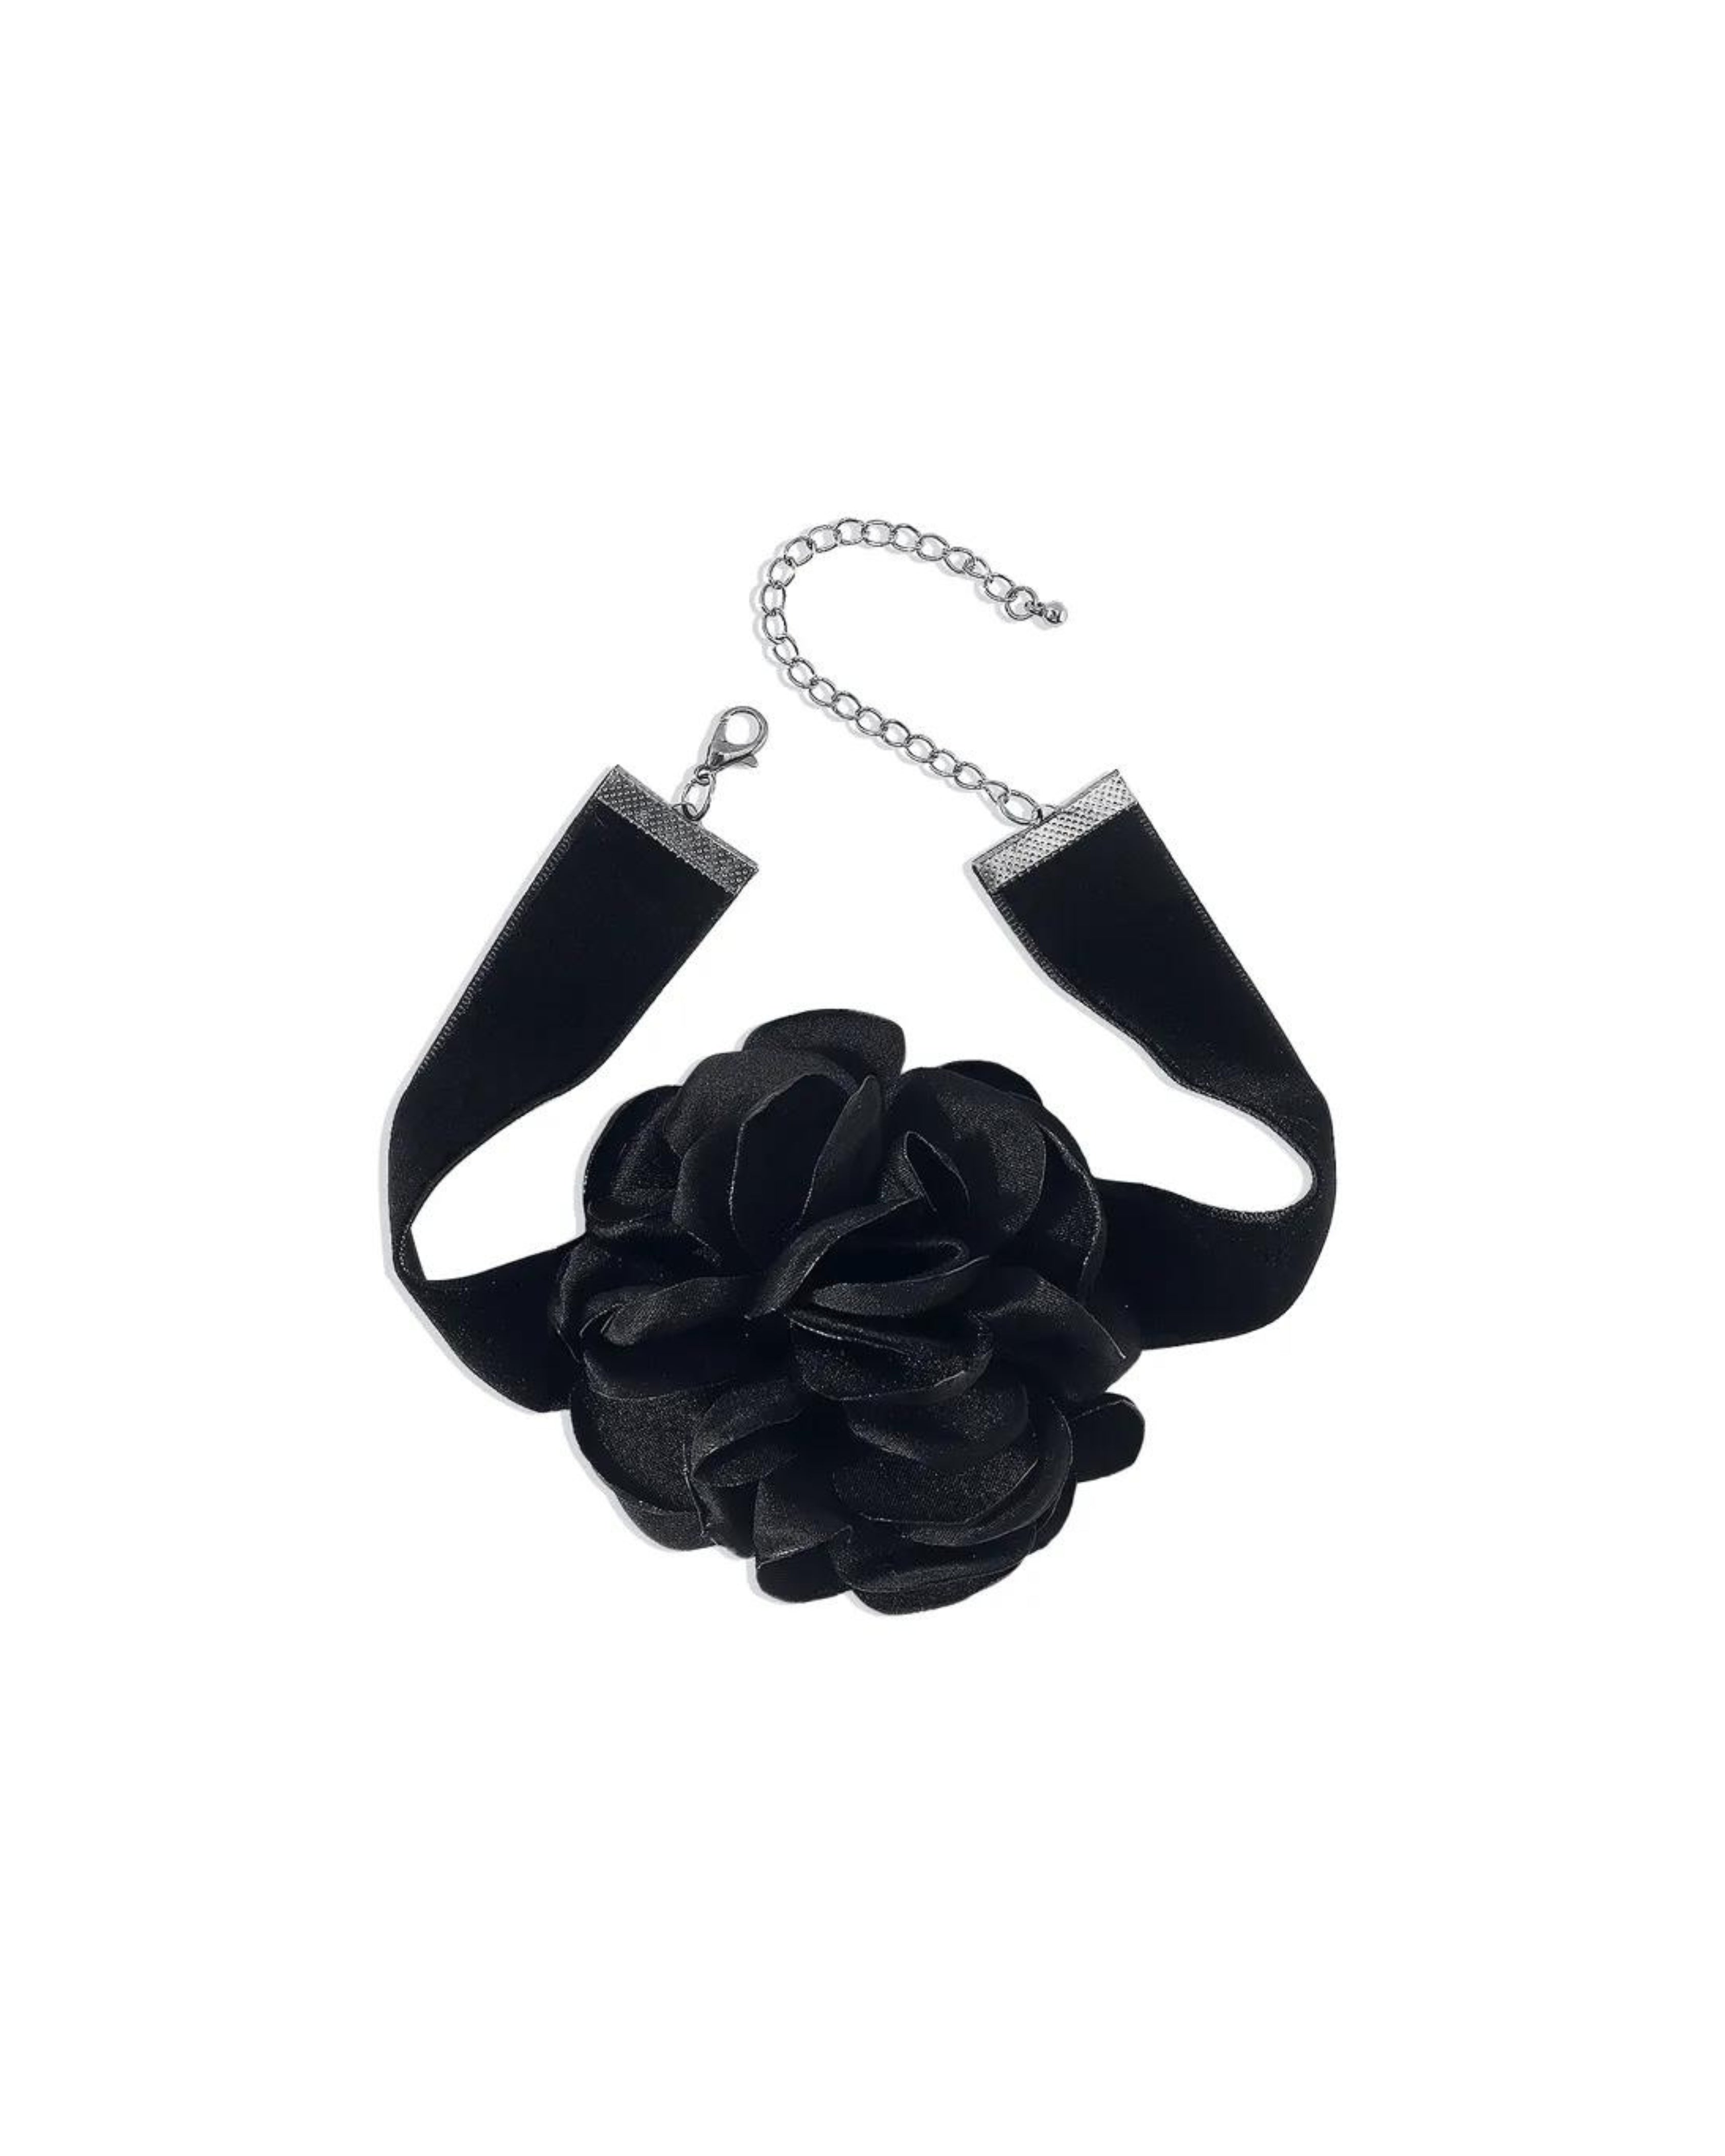 THE HARRY INSPIRED CORSAGE FLOWER CHOKER - EXCLUSIVE Jewellery from HEYIAMINHATELOVE - Just €10! SHOP NOW AT IAMINHATELOVE BOTH IN STORE FOR CYPRUS AND ONLINE WORLDWIDE @ IAMINHATELOVE.COM